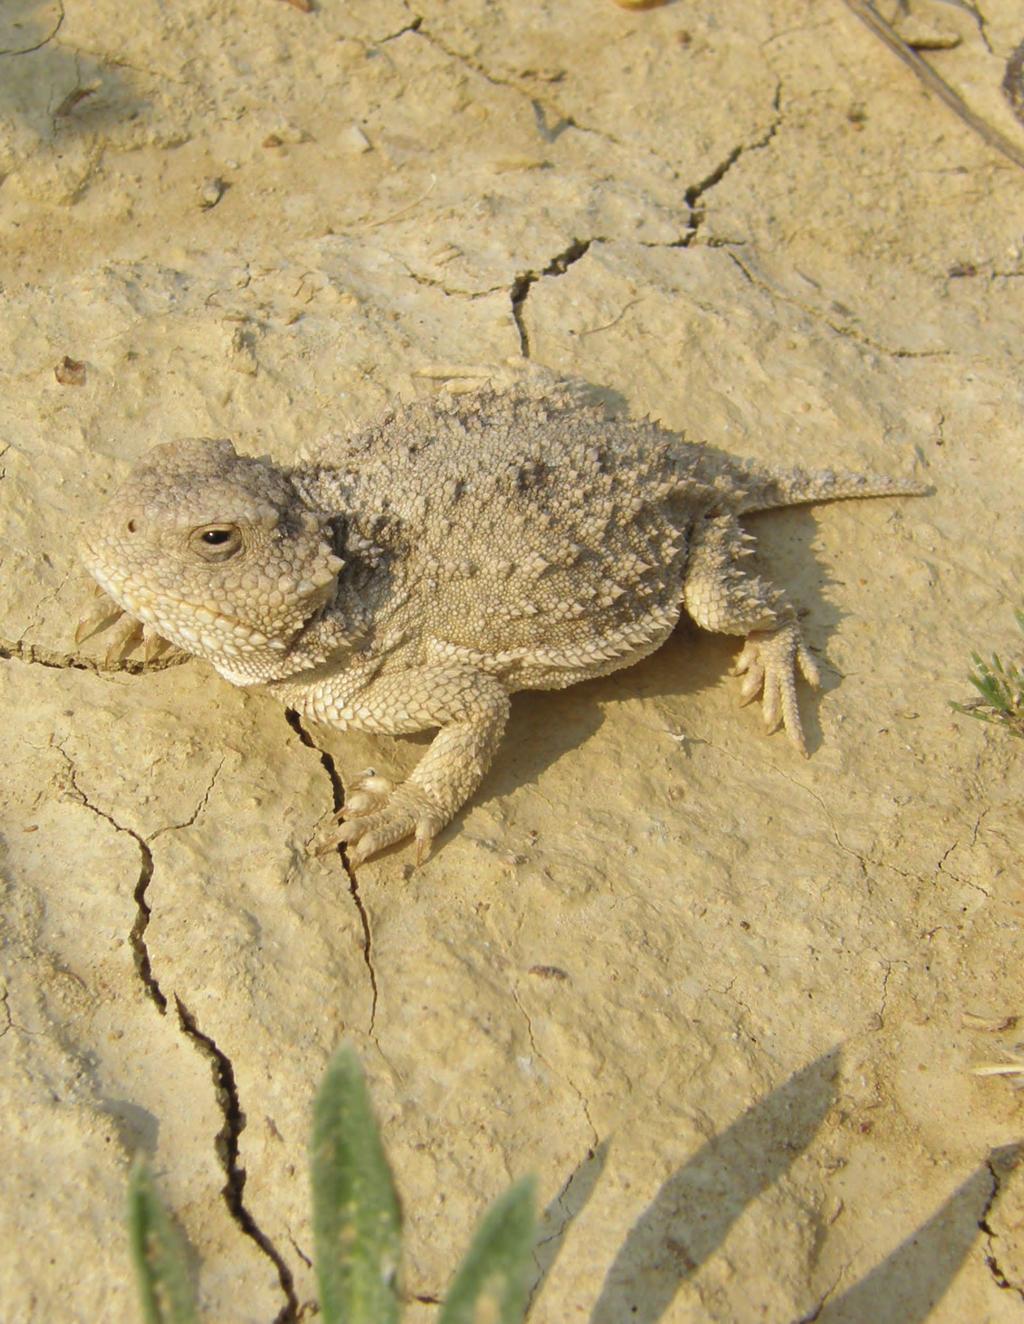 Alberta Conservation Association - Reptiles of Alberta 4 mountain short-horned lizard Mountain Short-horned Lizard Phrynosoma hernandesi Phrynosomatidae Up to 7 cm Live-bearing At Risk Despite its